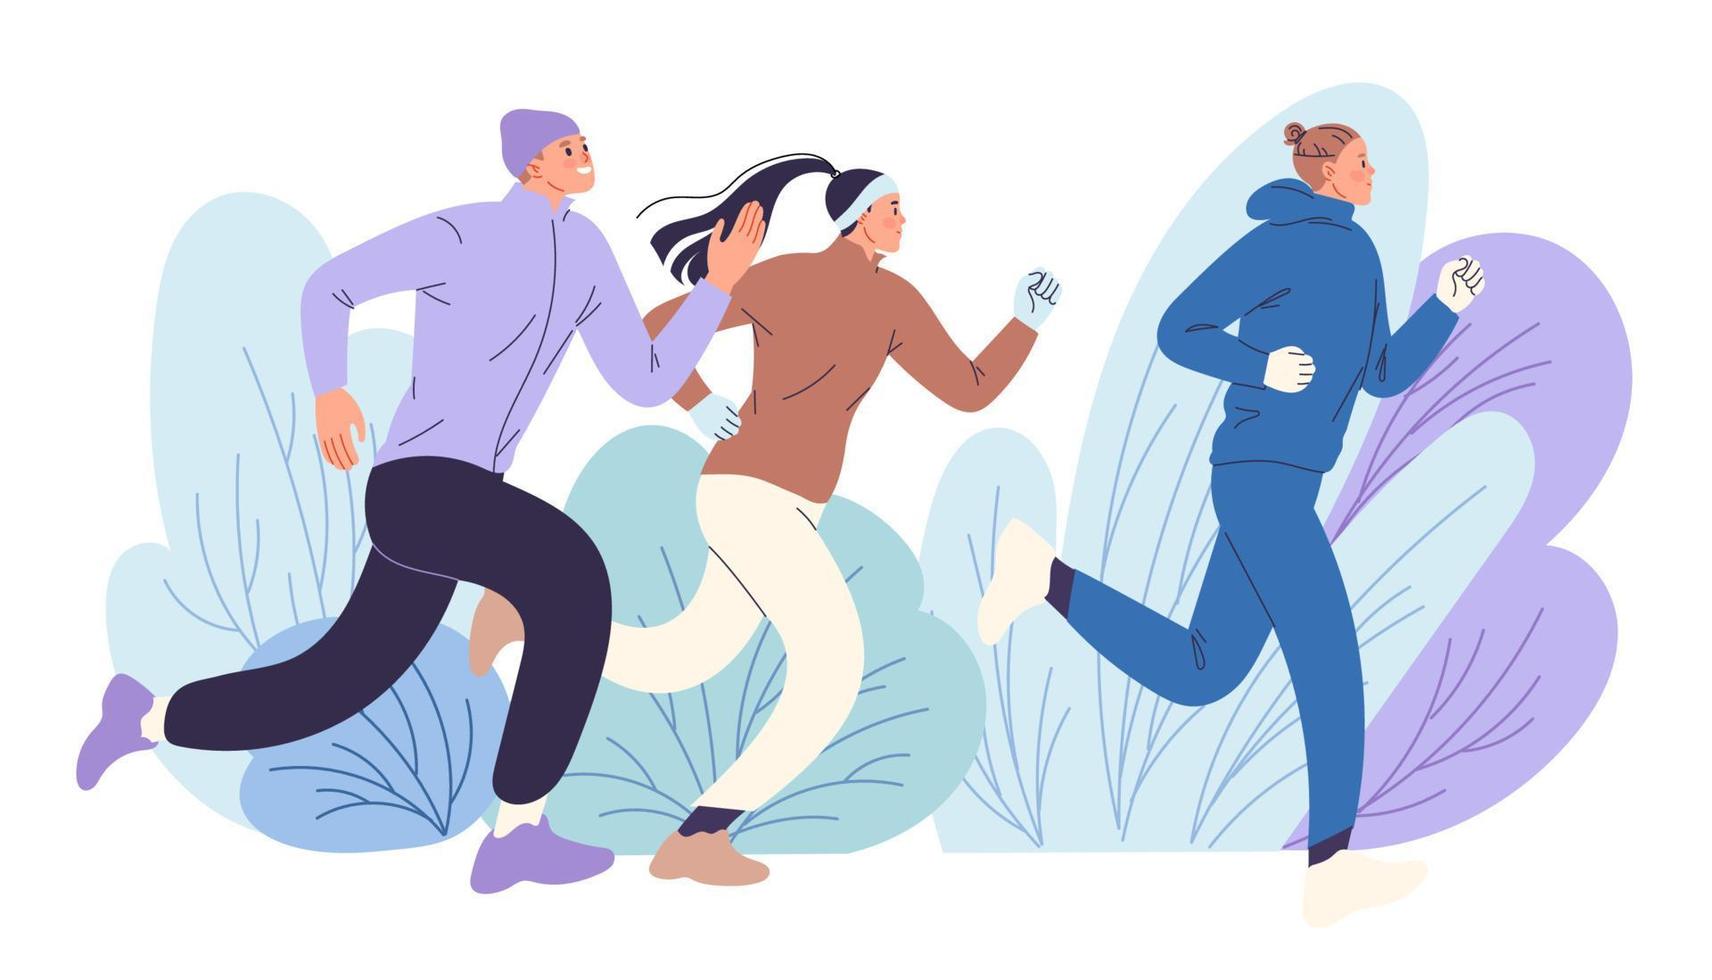 Group of runners running in the park vector